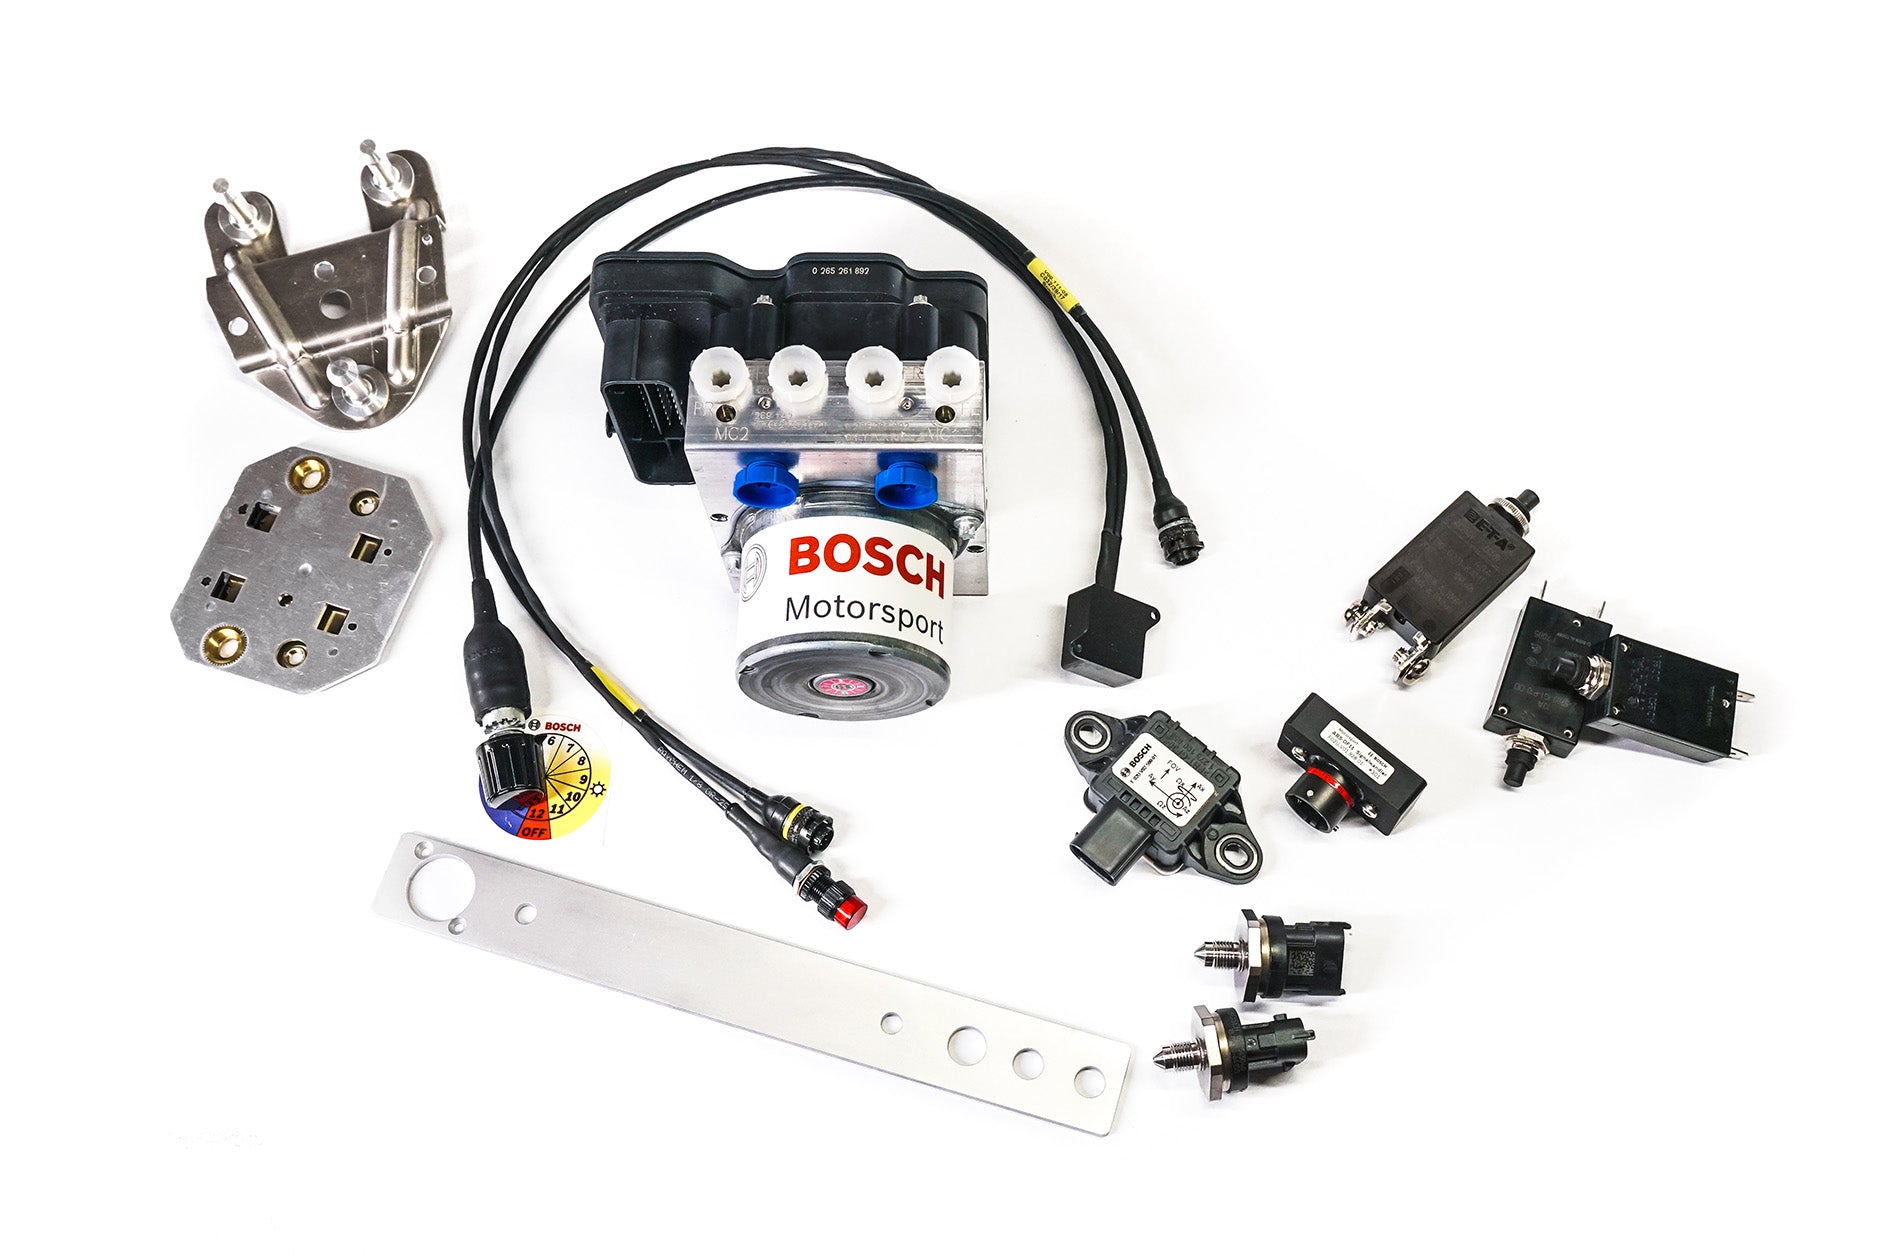 Which Bosch Motorsport ABS kit is right for you?